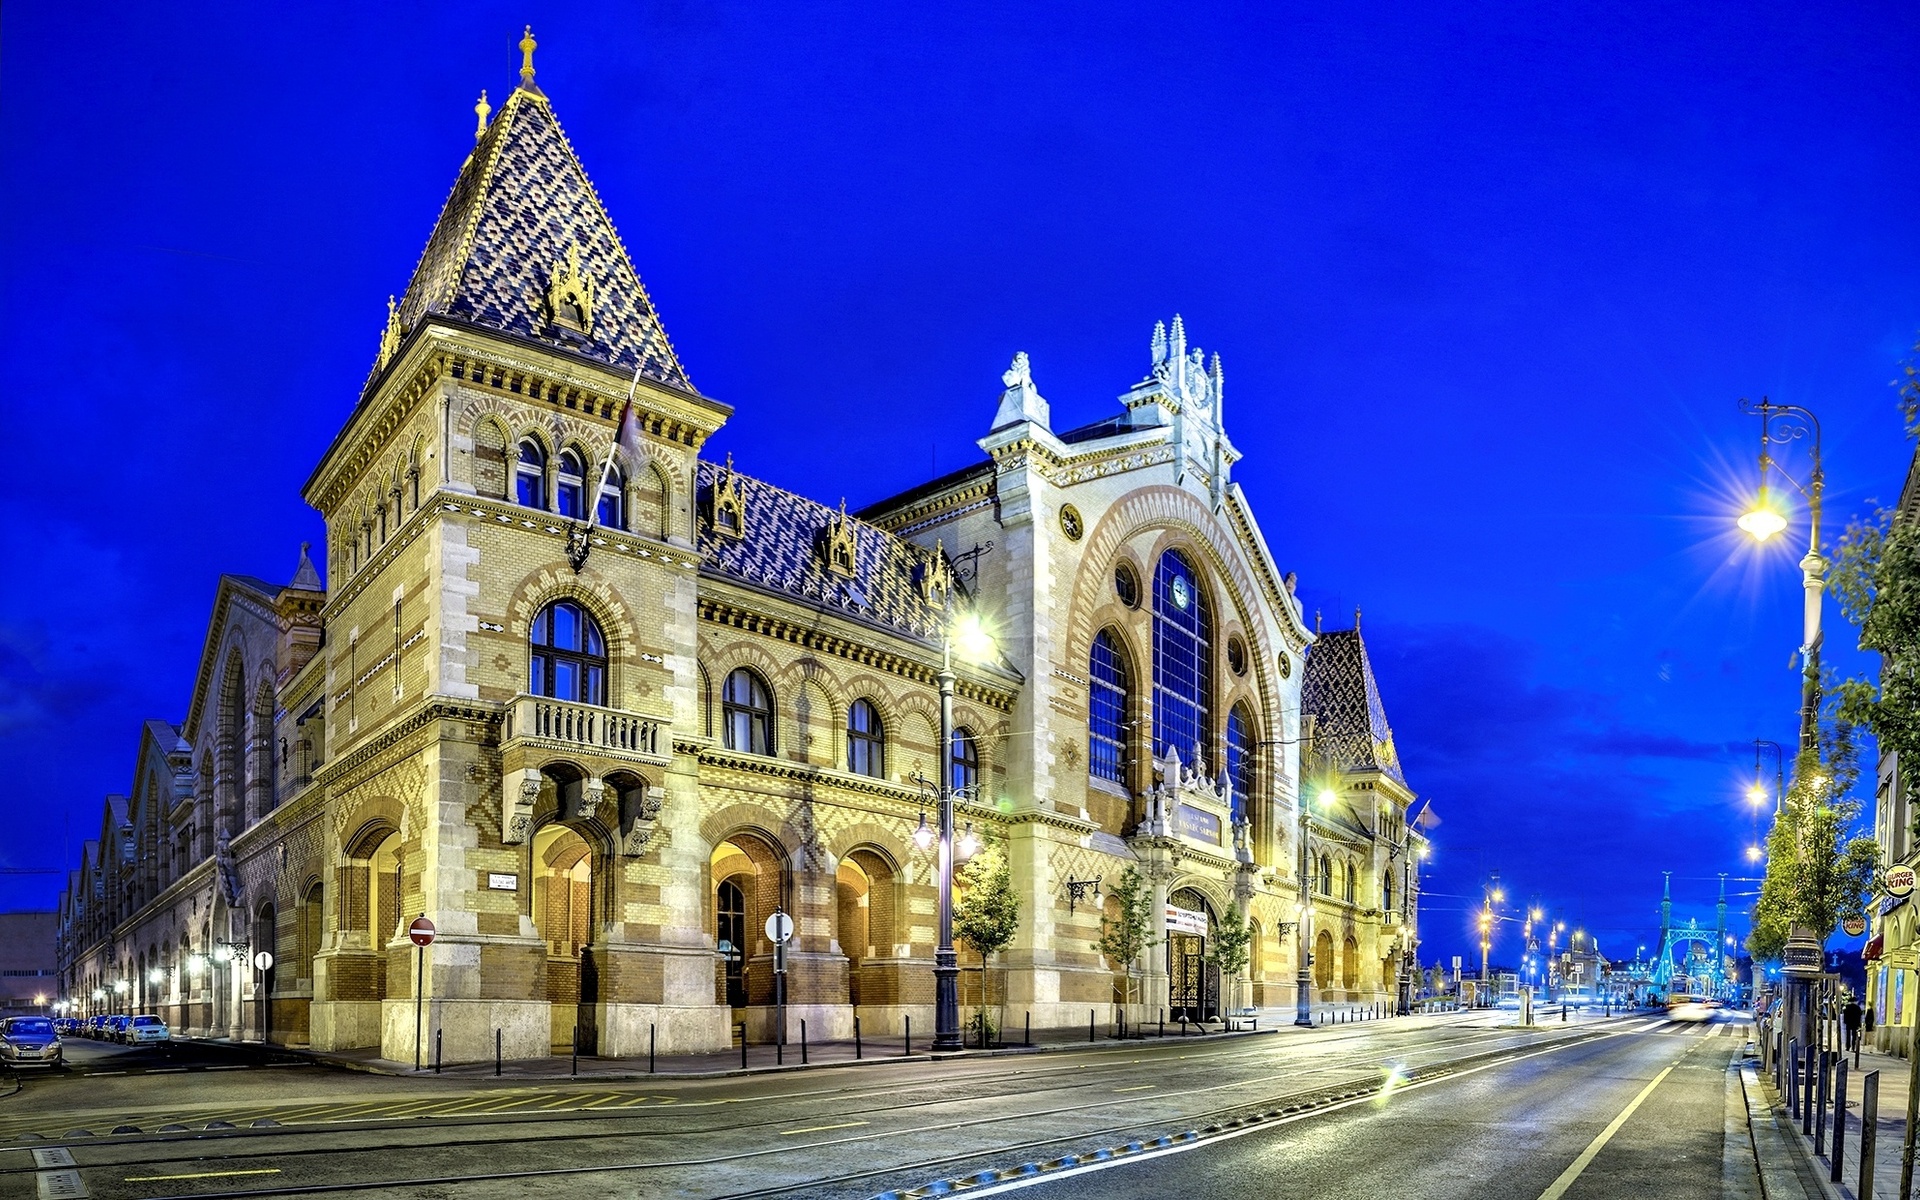 Great Market Hall in Budapest, Hungary